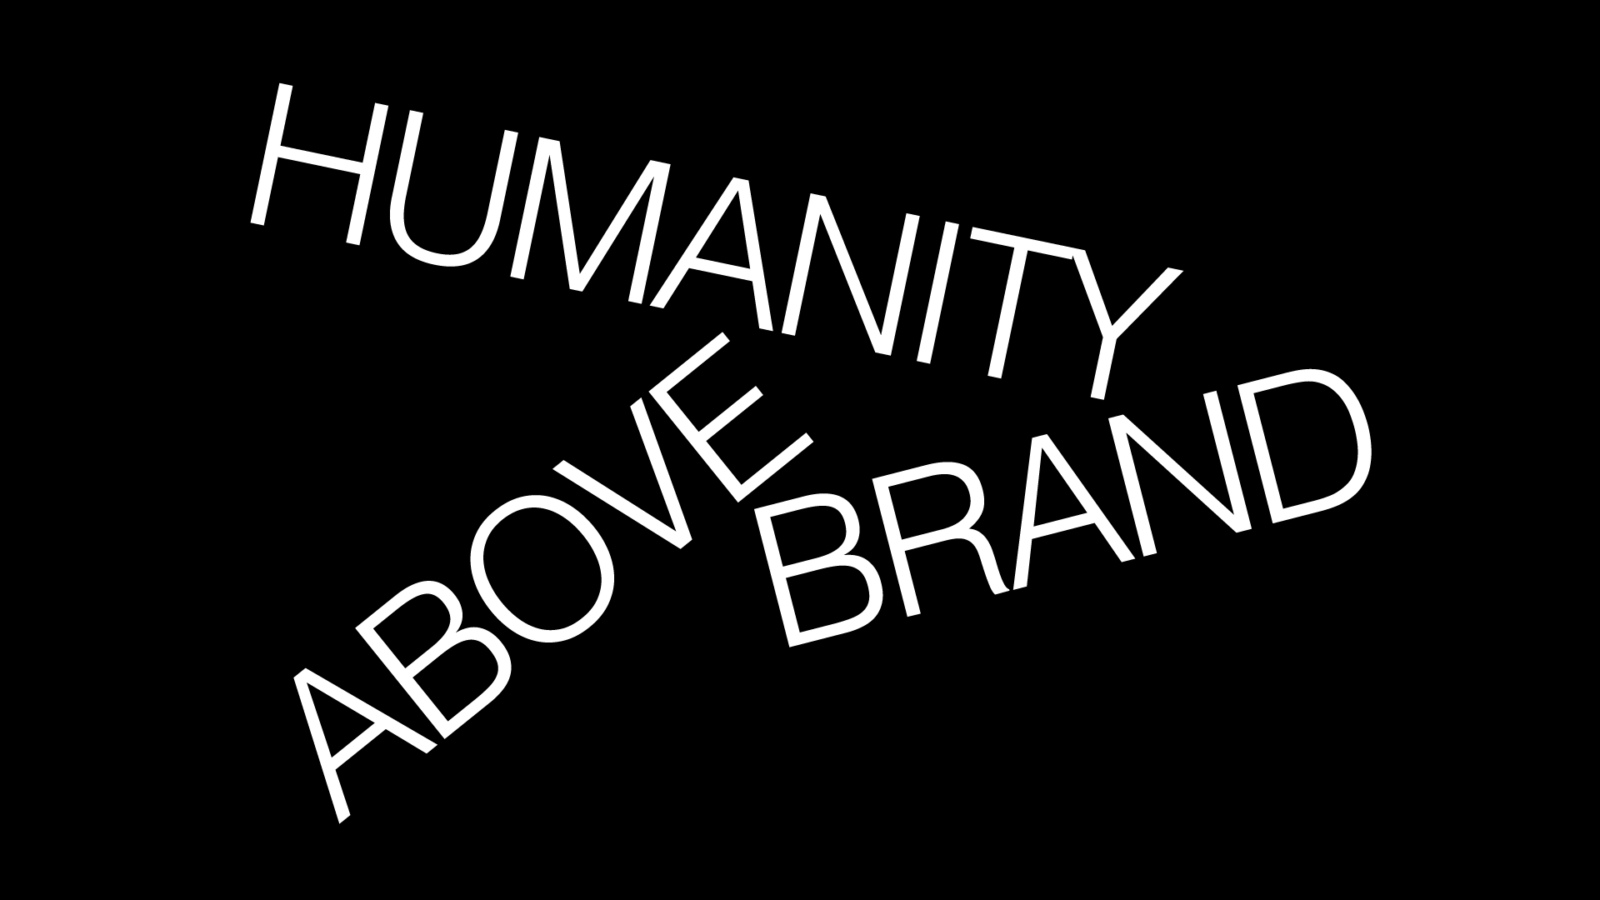 Humanity Above Brand